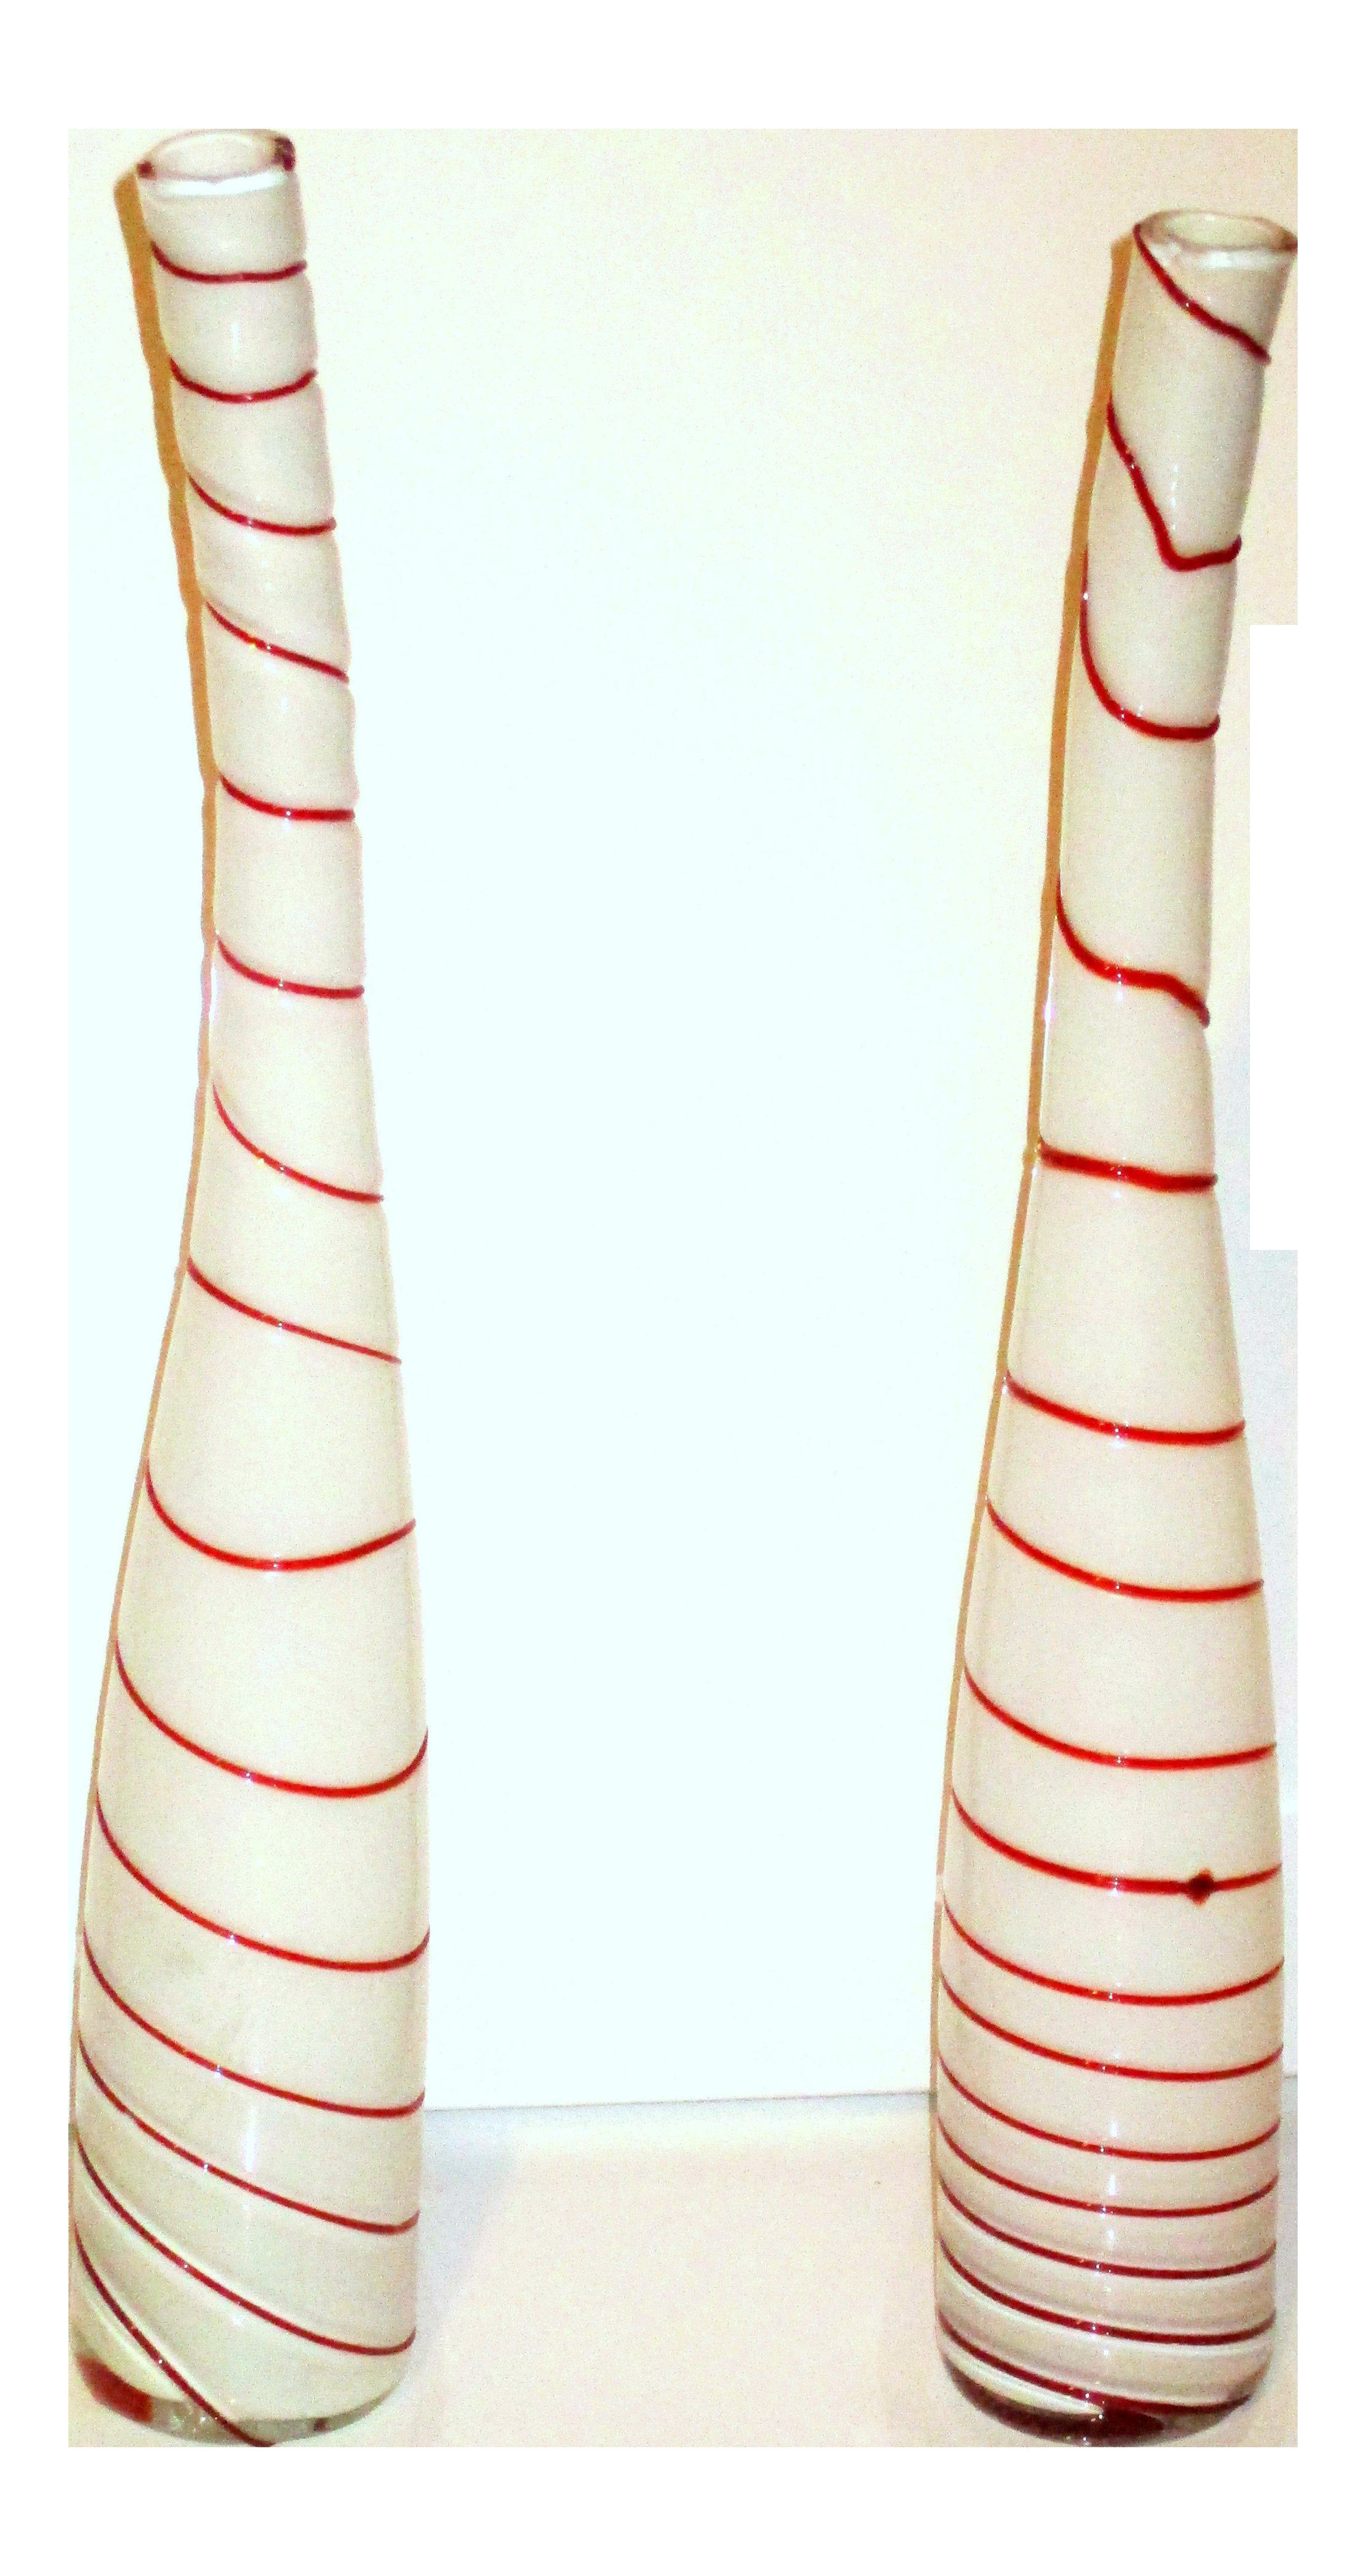 29 Nice Red Glass Vases for Sale 2024 free download red glass vases for sale of venetian glass vase beautiful art glass murano glass striped pertaining to venetian glass vase beautiful art glass murano glass striped peppermint white red